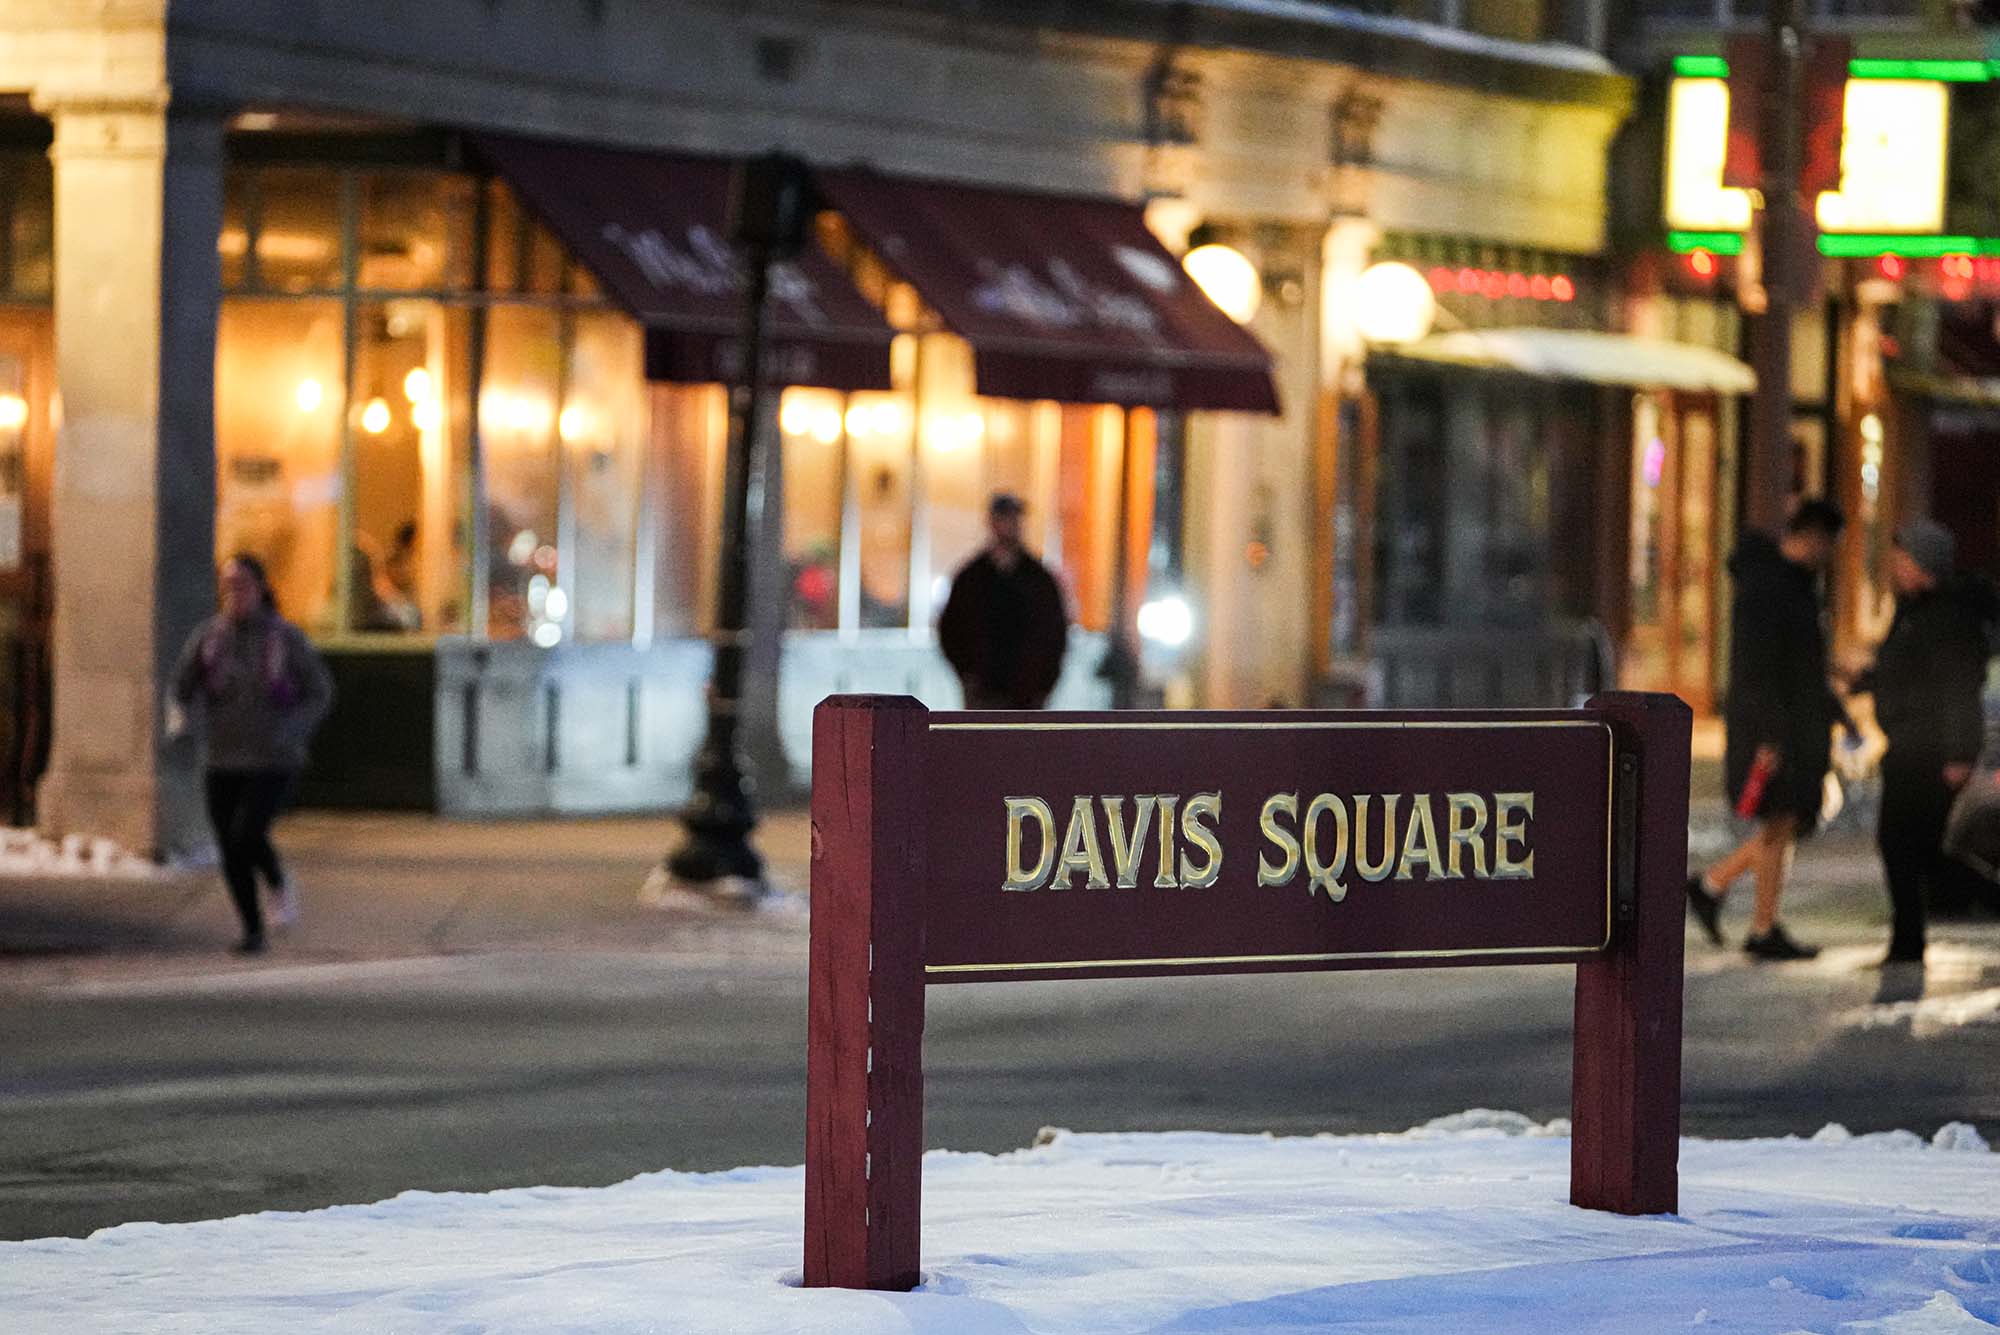 Photo of the red Davis Square sign with gold lettering taken when there was snow on the ground. Behind the sign, businesses are lit up at night.